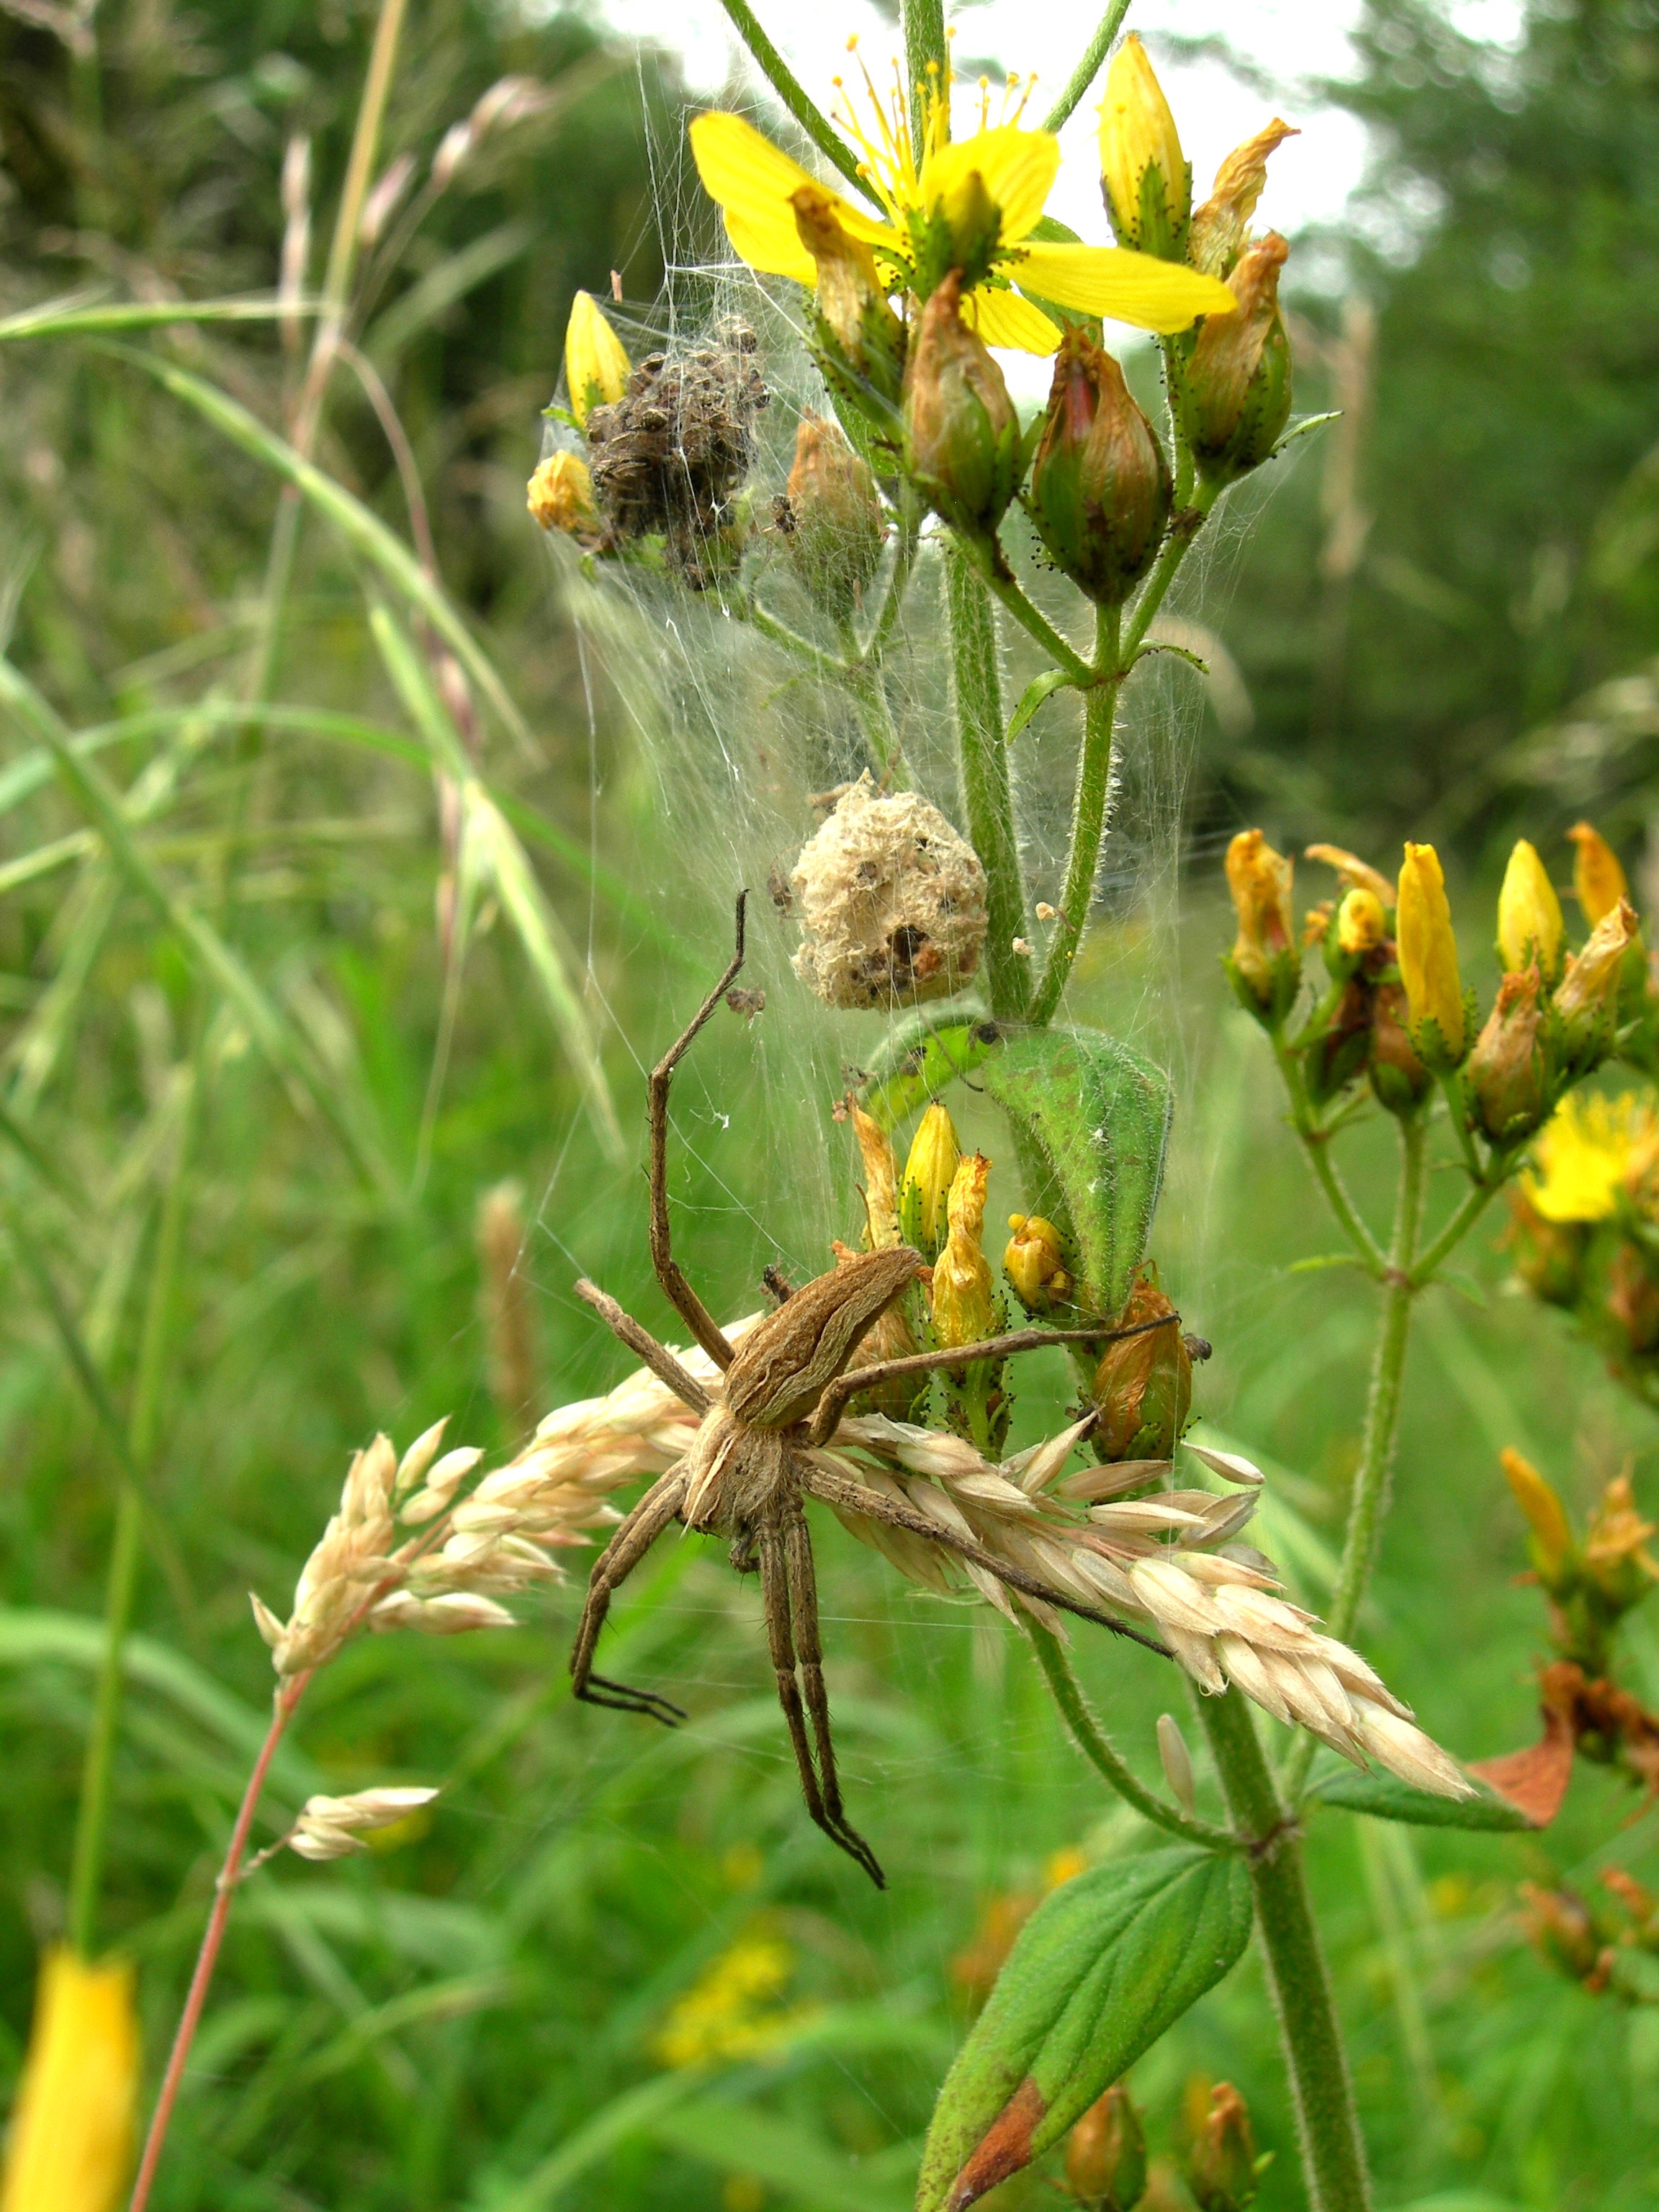  The Nursery-web spider, Pisaura mirabilis. Although there are only a handfull of records for our vice county (VC64), Ox Close has a healthy population of these arachnids. © R. Baker.